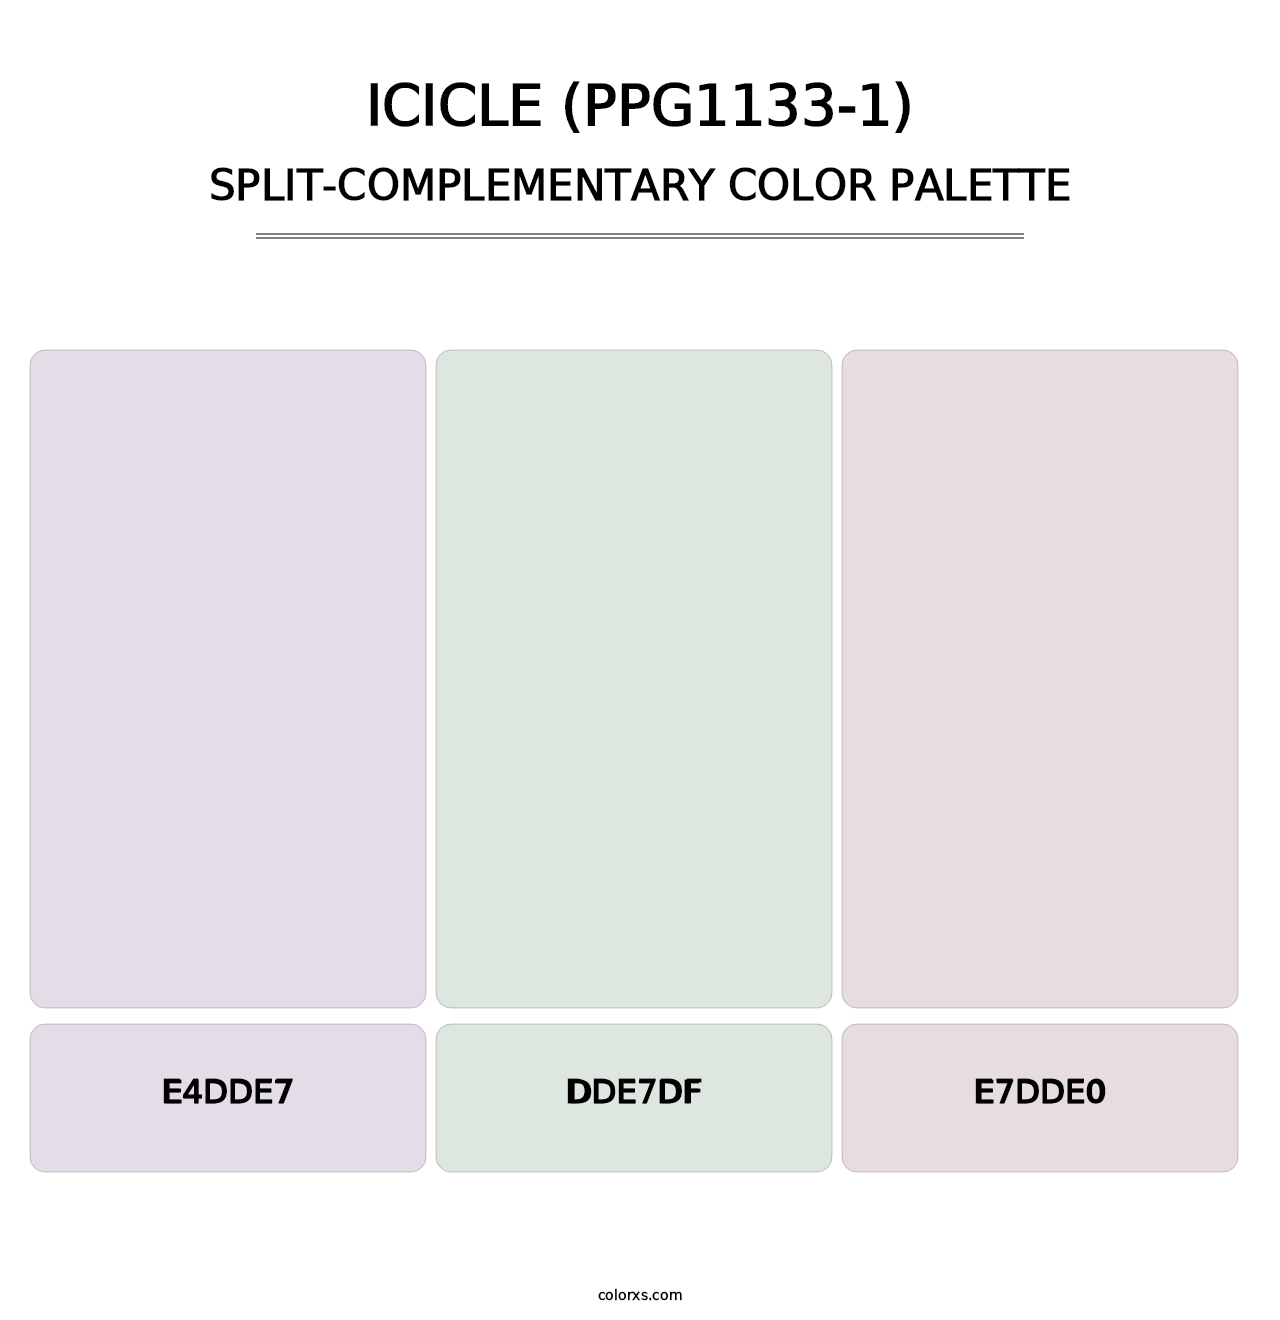 Icicle (PPG1133-1) - Split-Complementary Color Palette